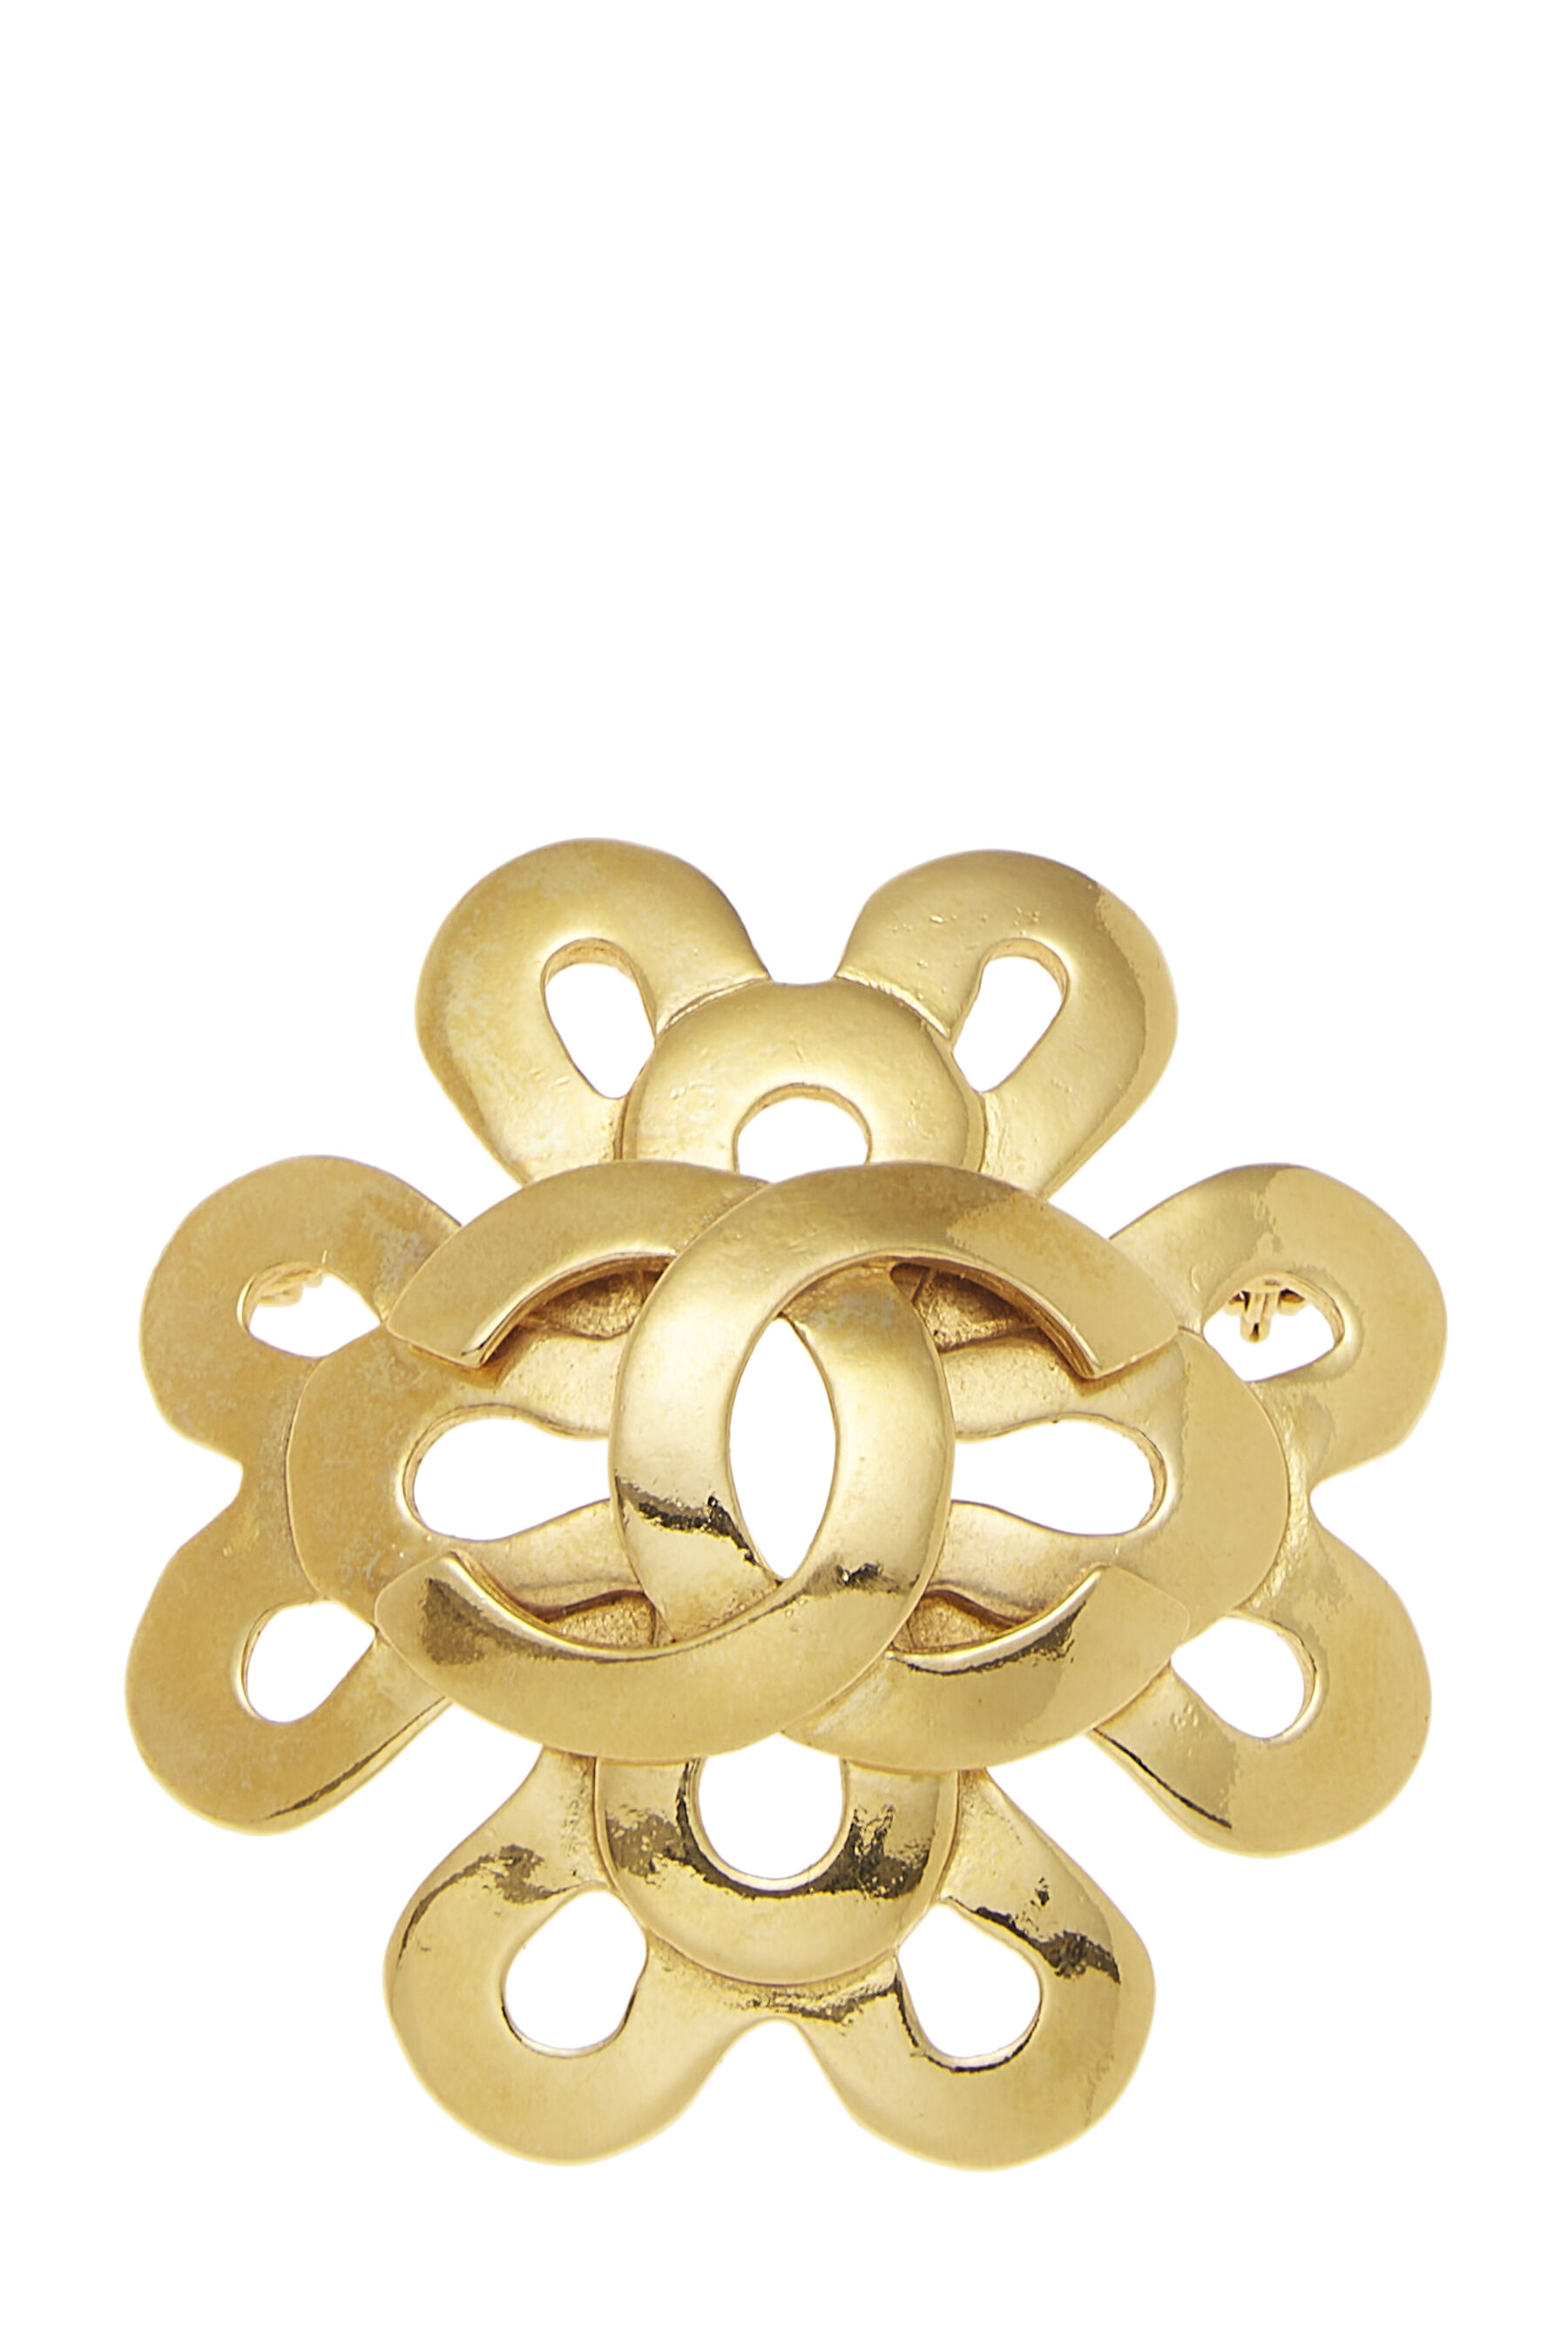 Chanel - Gold 'CC' Clover Pin